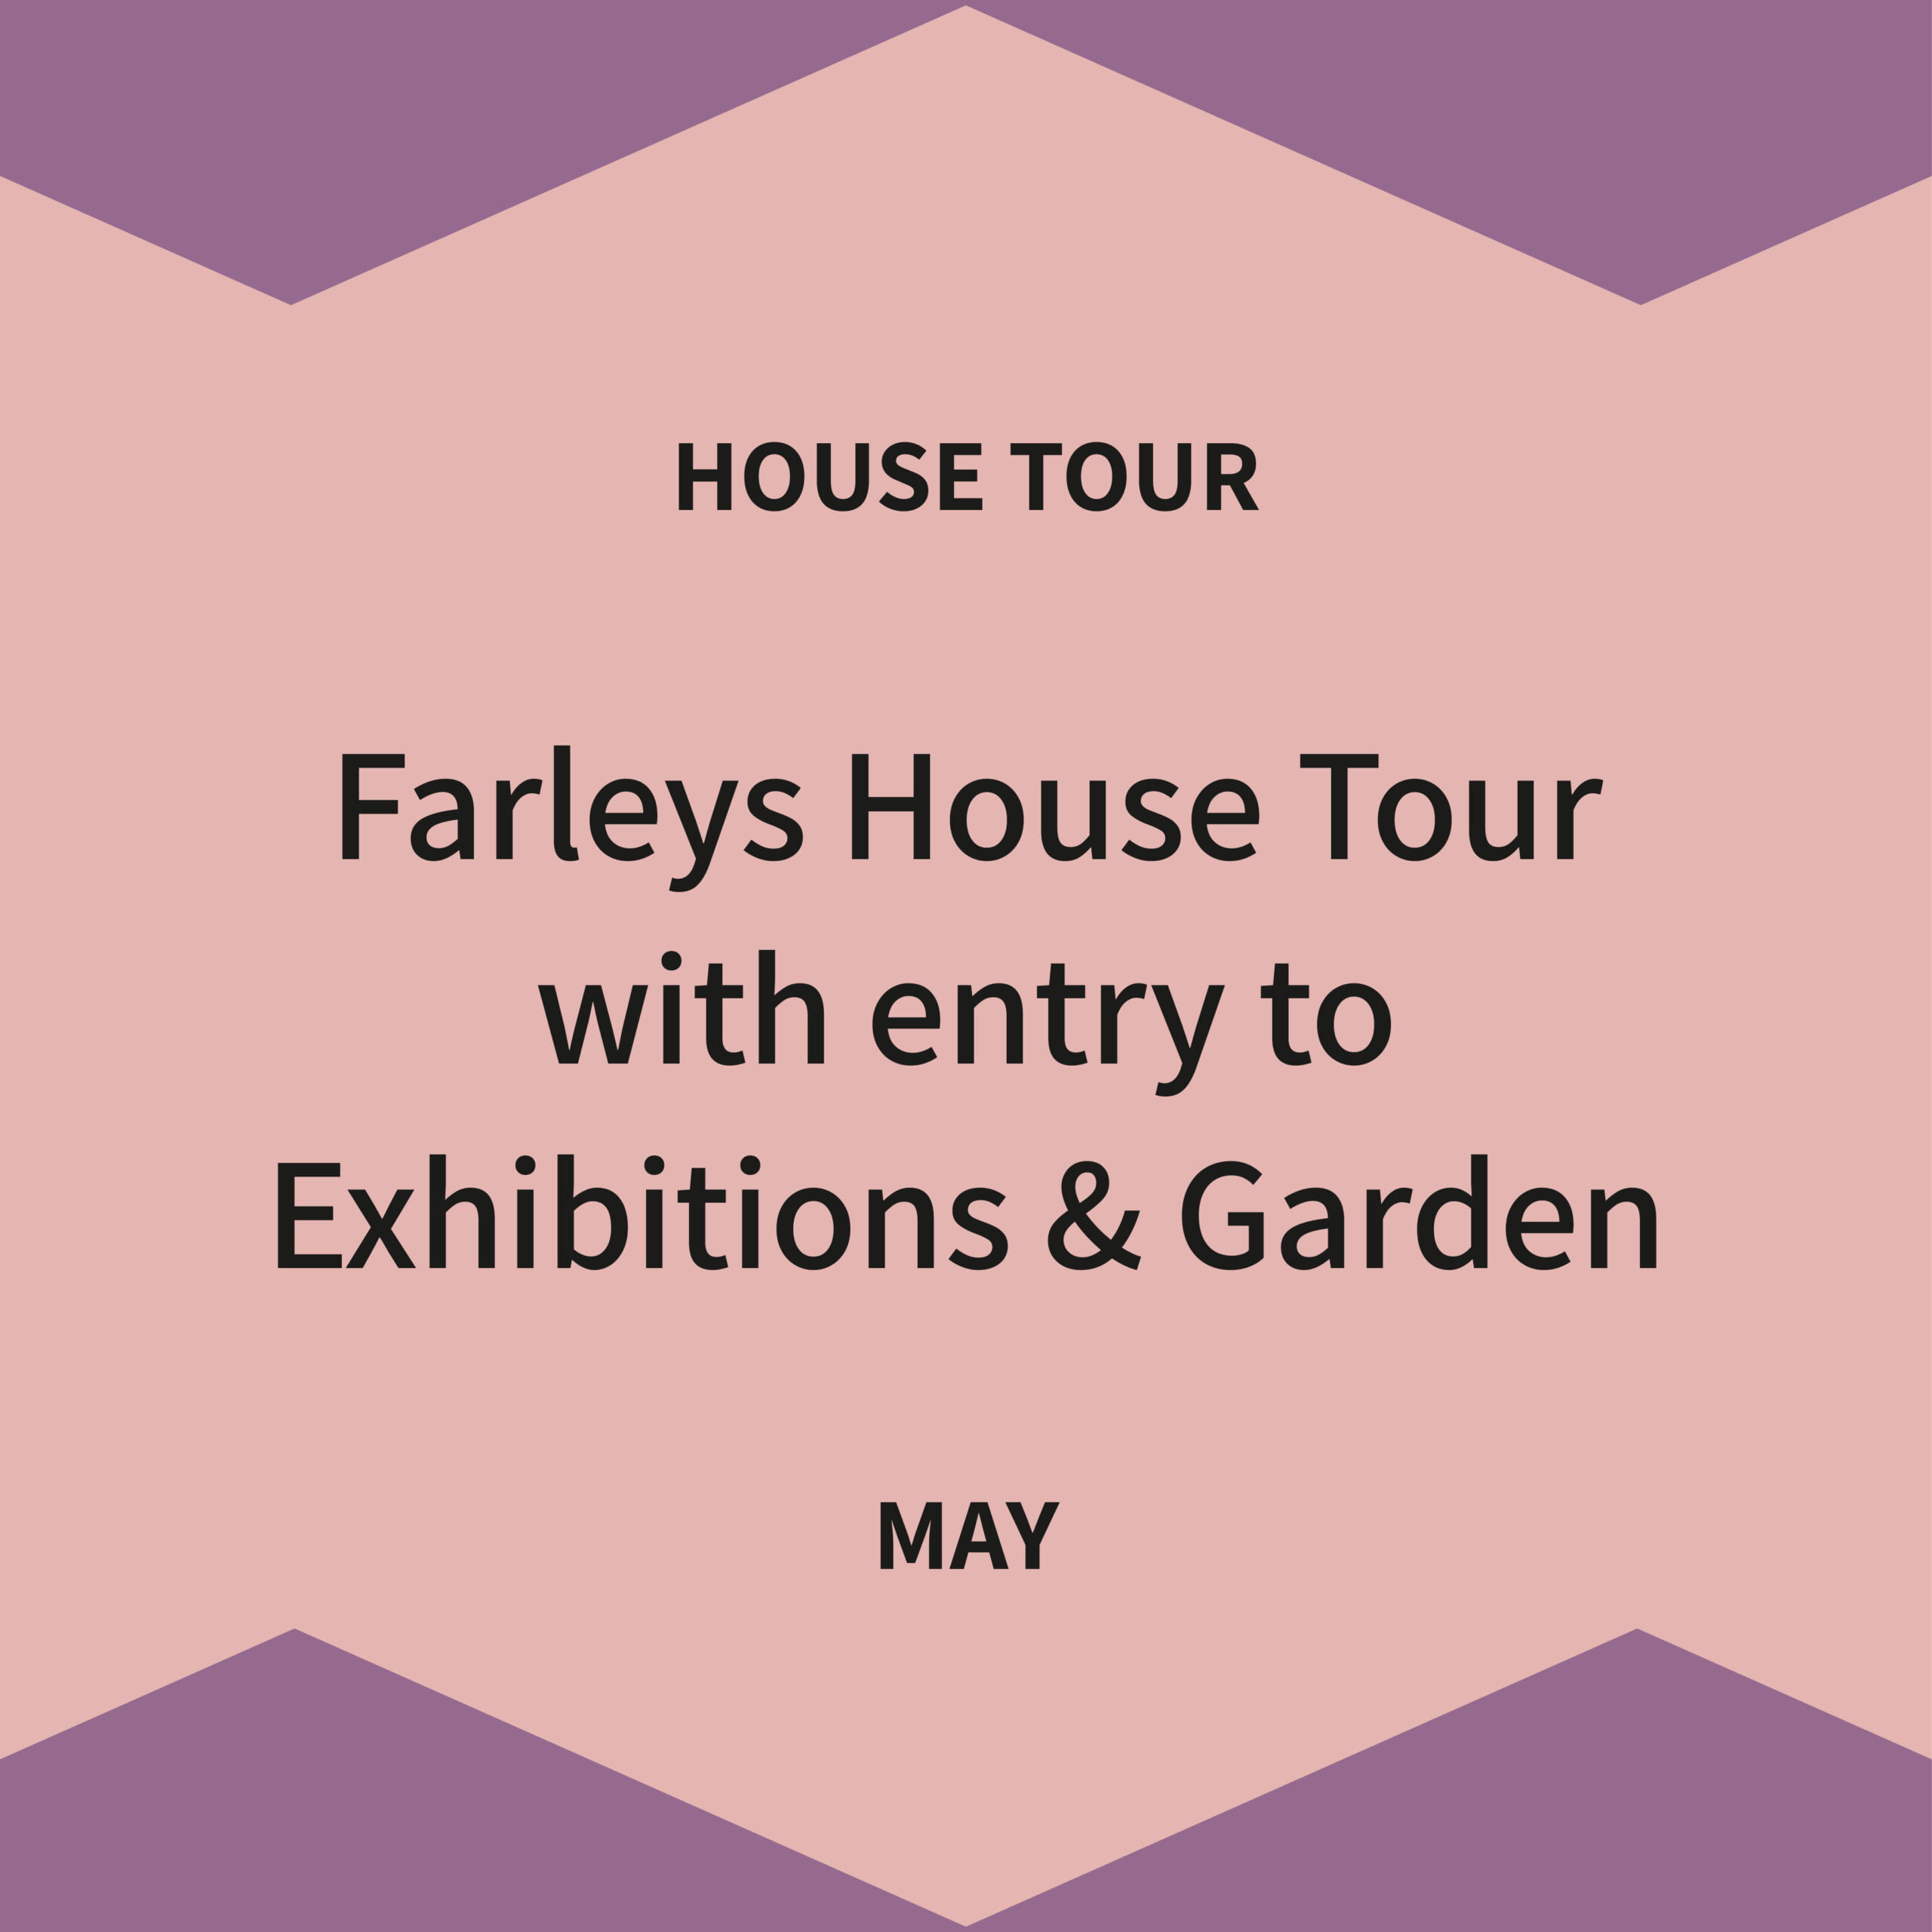 House tour tickets May